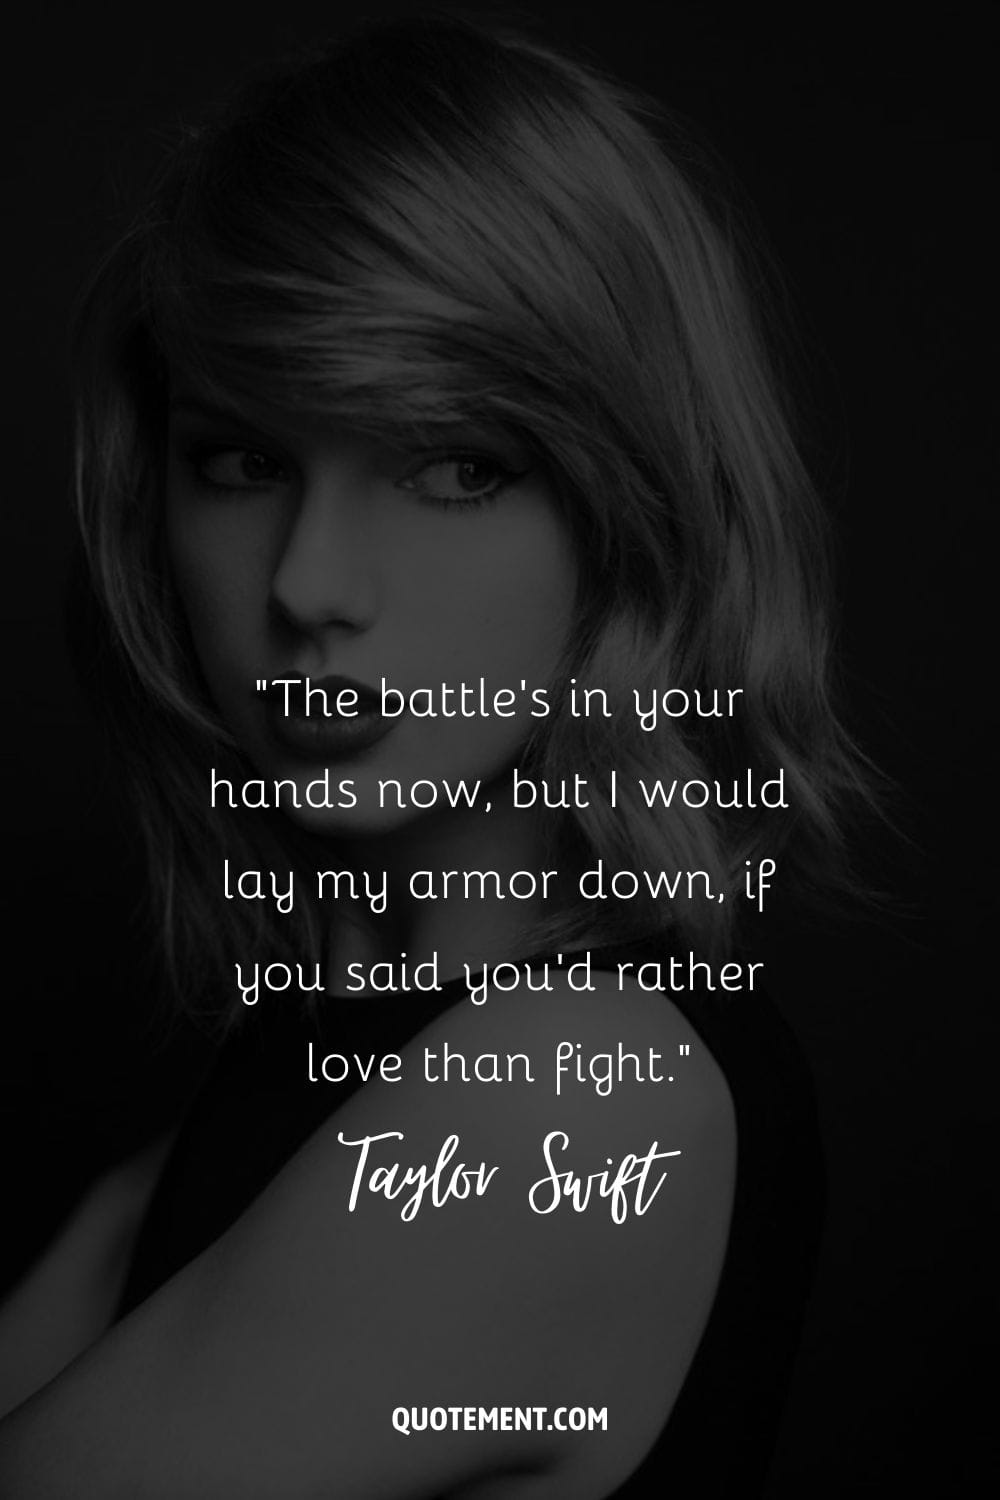 “The battle's in your hands now, but I would lay my armor down, if you said you'd rather love than fight.” ― Taylor Swift